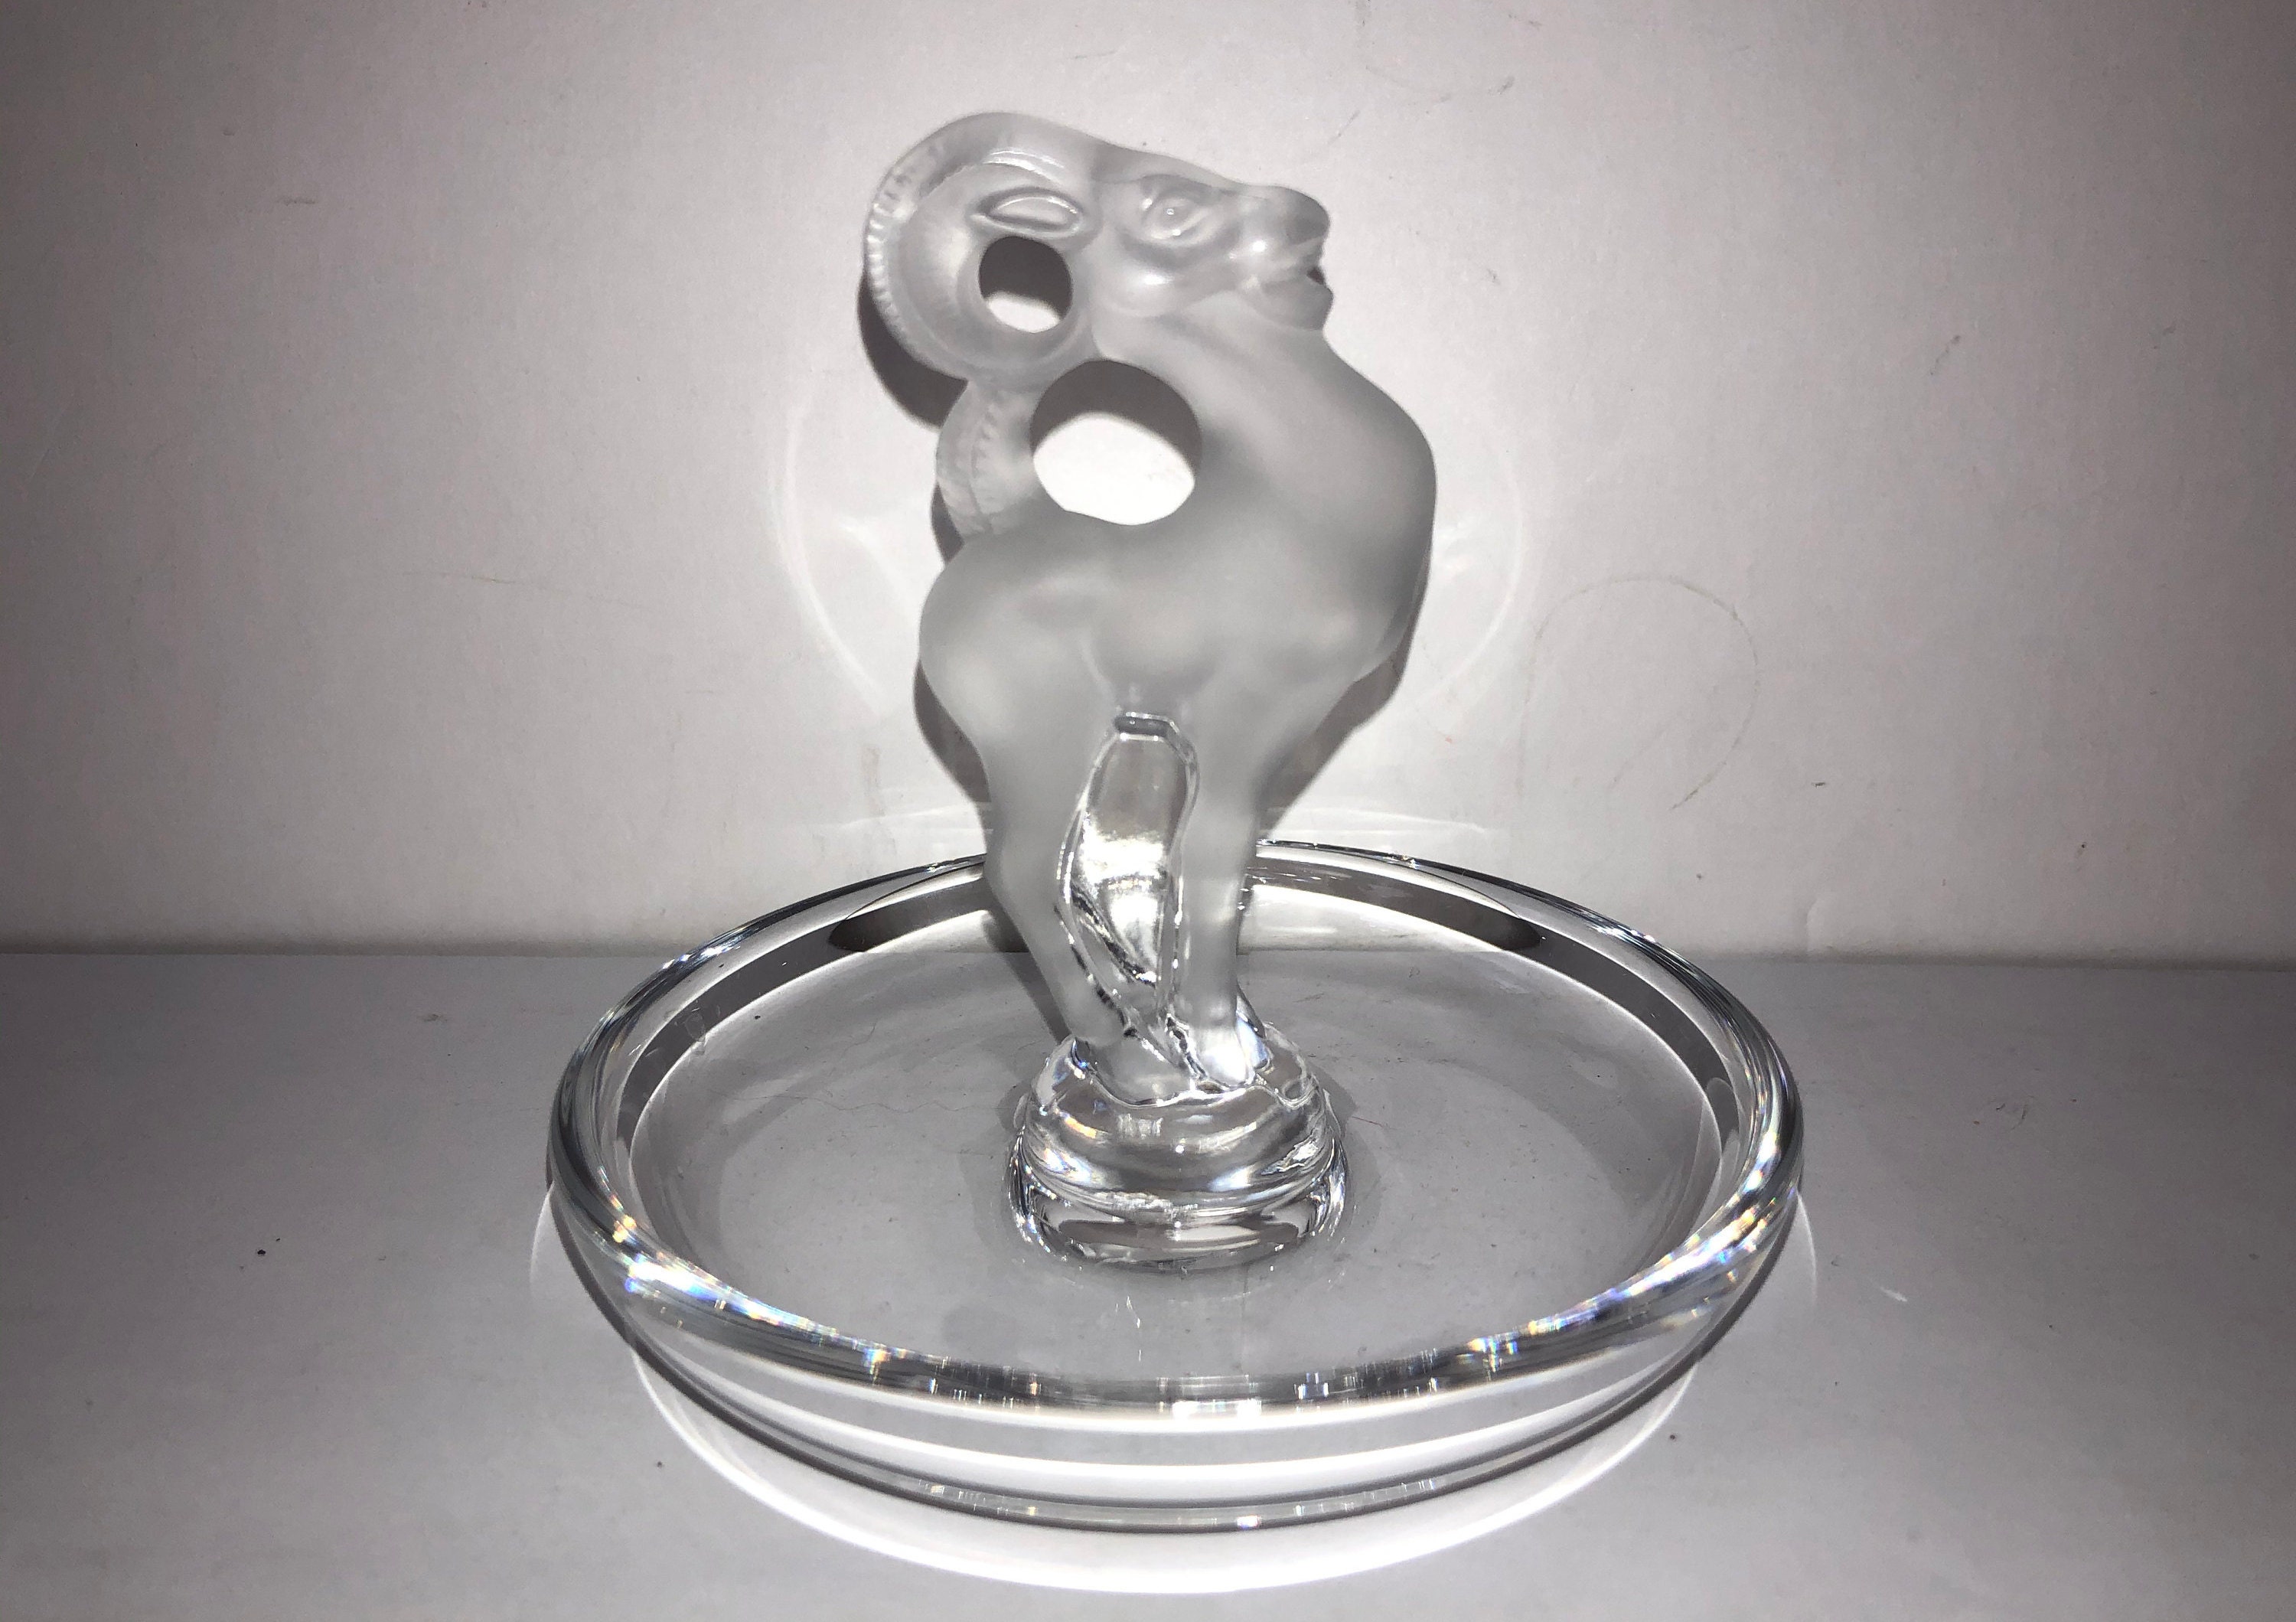 Lalique Crystal Ram Ring Bowl Dish, Frosted Ram, Signed Lalique, French Iconic Holder, Pin Tray